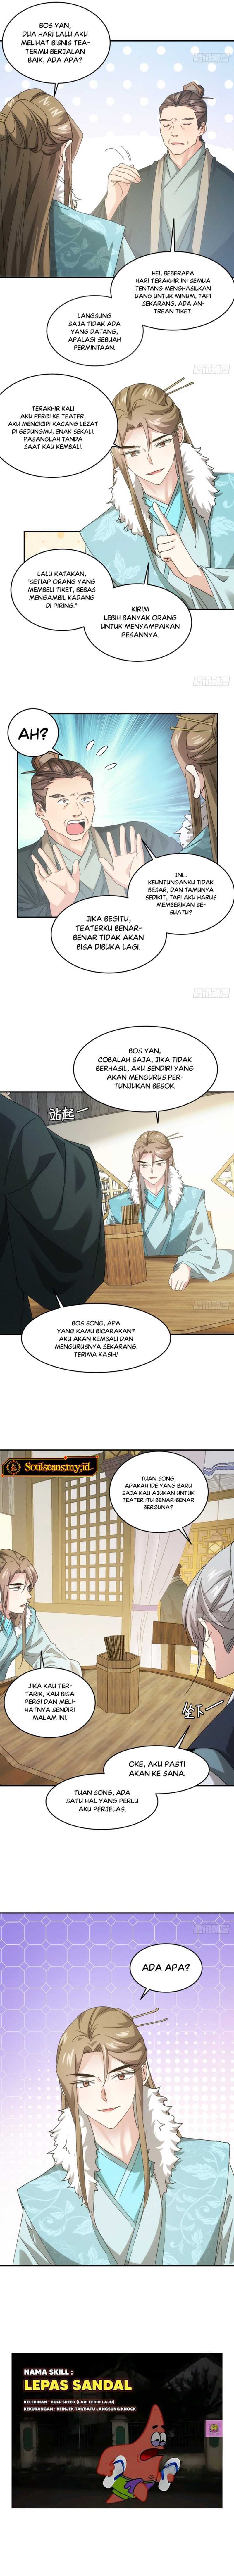 Dilarang COPAS - situs resmi www.mangacanblog.com - Komik i just dont play the card according to the routine 135 - chapter 135 136 Indonesia i just dont play the card according to the routine 135 - chapter 135 Terbaru 7|Baca Manga Komik Indonesia|Mangacan